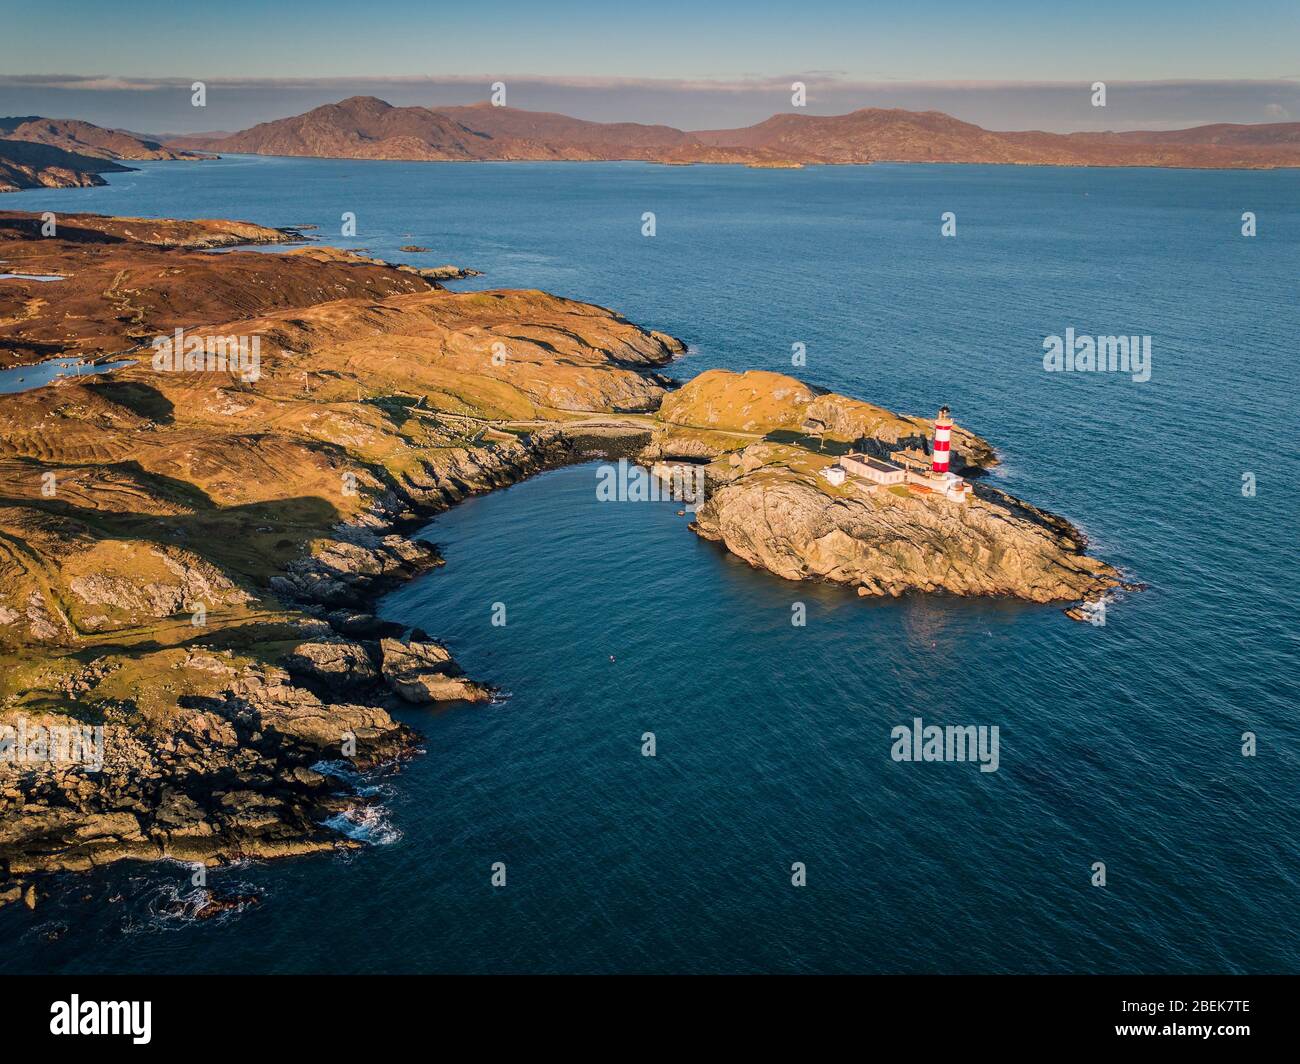 An Aerial photograph overlooking Eilean Glas Lighthouse on the Isle of Scaplay, Outer Hebridies, Scotland Stock Photo